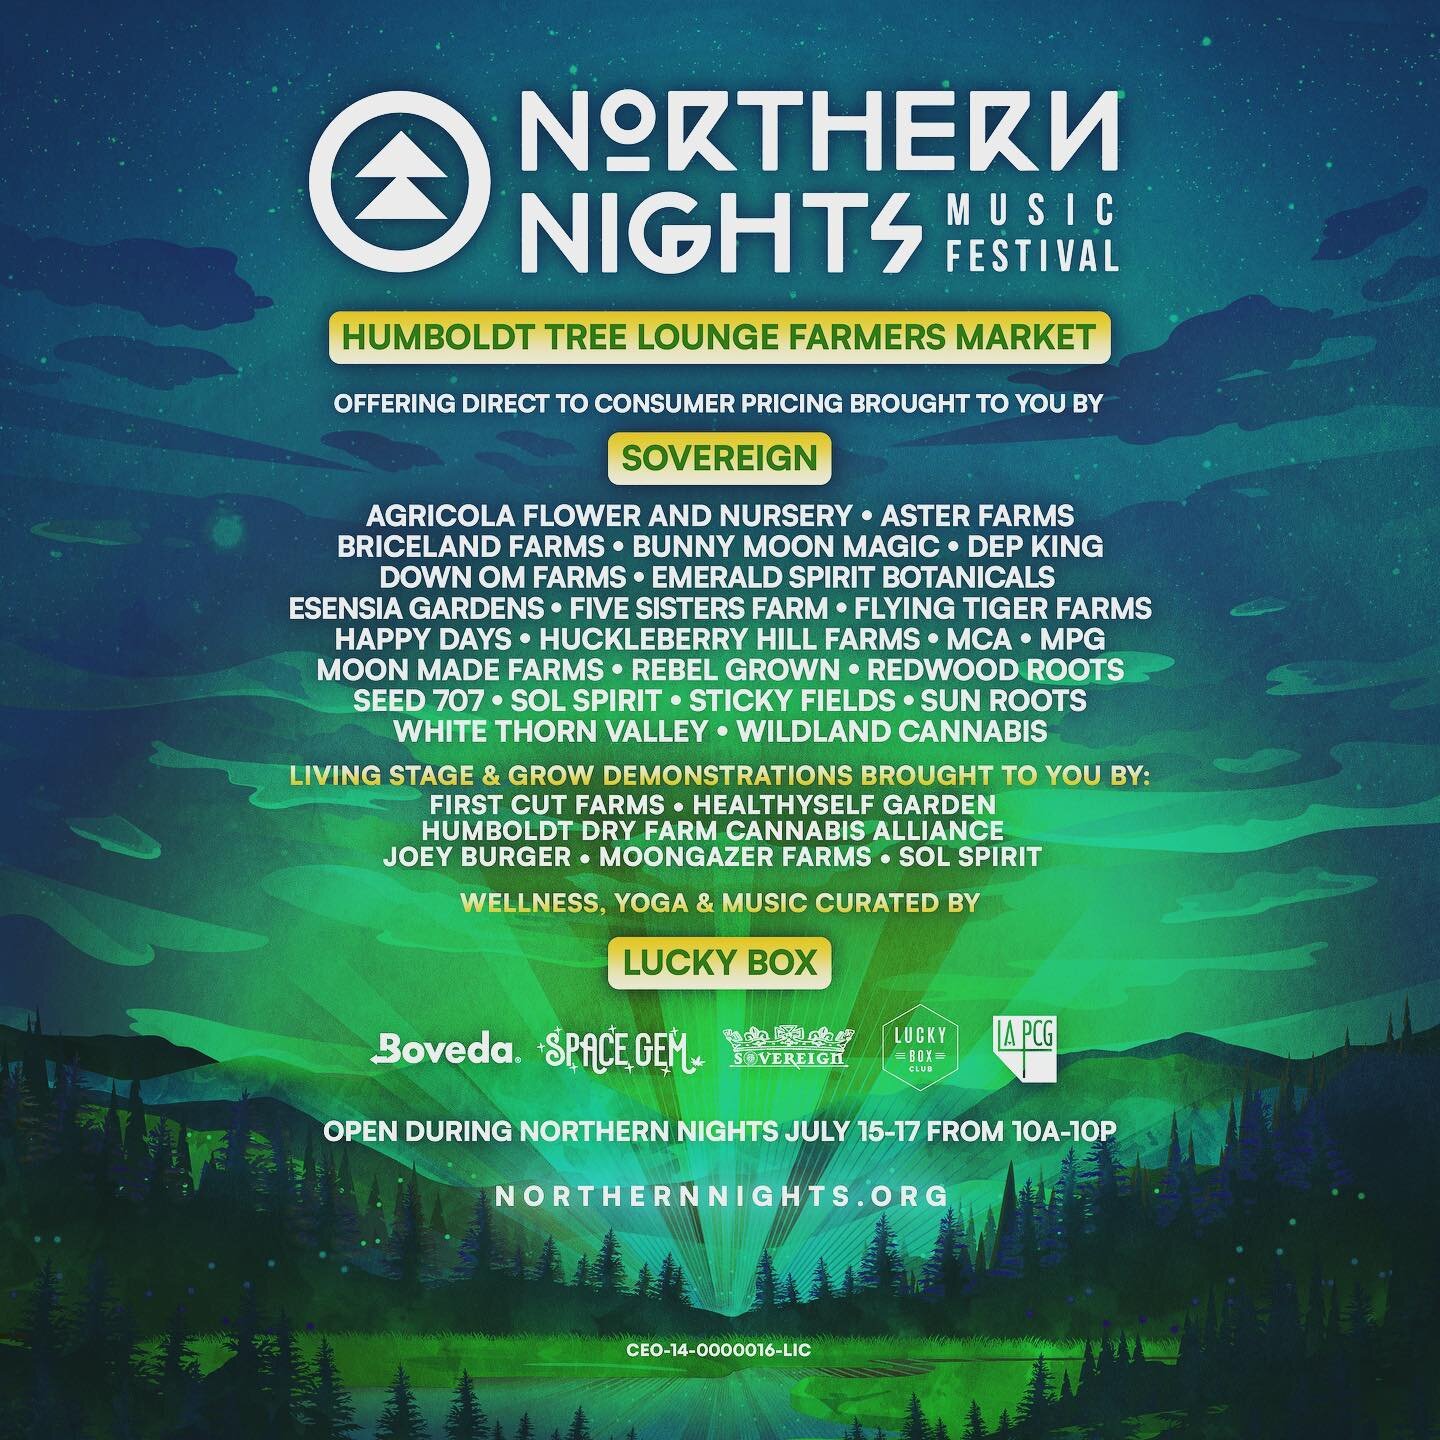 We are excited to be included in the Tree Lounge Farmers Market at the Northern Nights music festival this weekend July 15-17. We&rsquo;ll have several strains available and will be hanging with these other amazing farms talking about all things cann